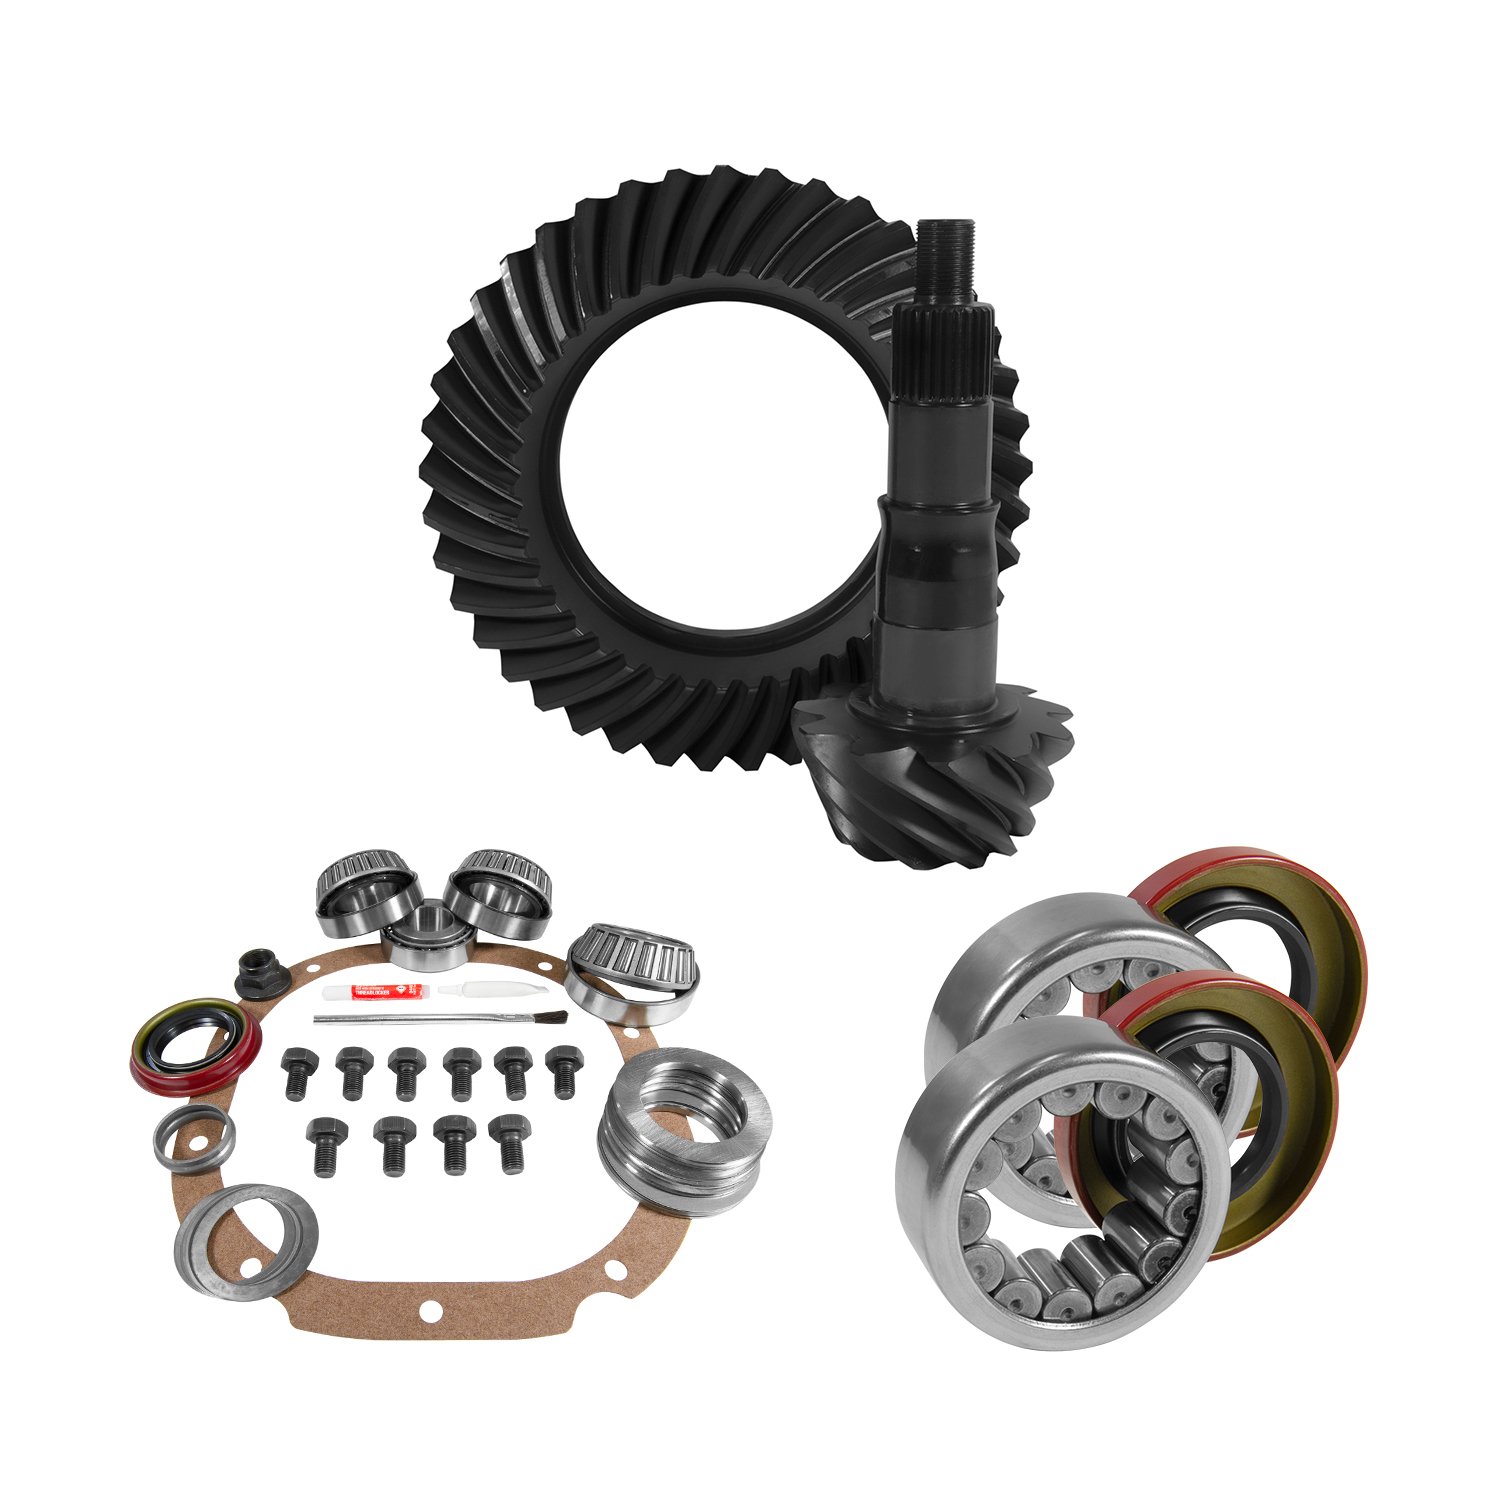 USA Standard 10766 8.8 in. Ford 3.55 Rear Ring & Pinion Install Kit, 2.99 in. Od Axle Bearings & Seals